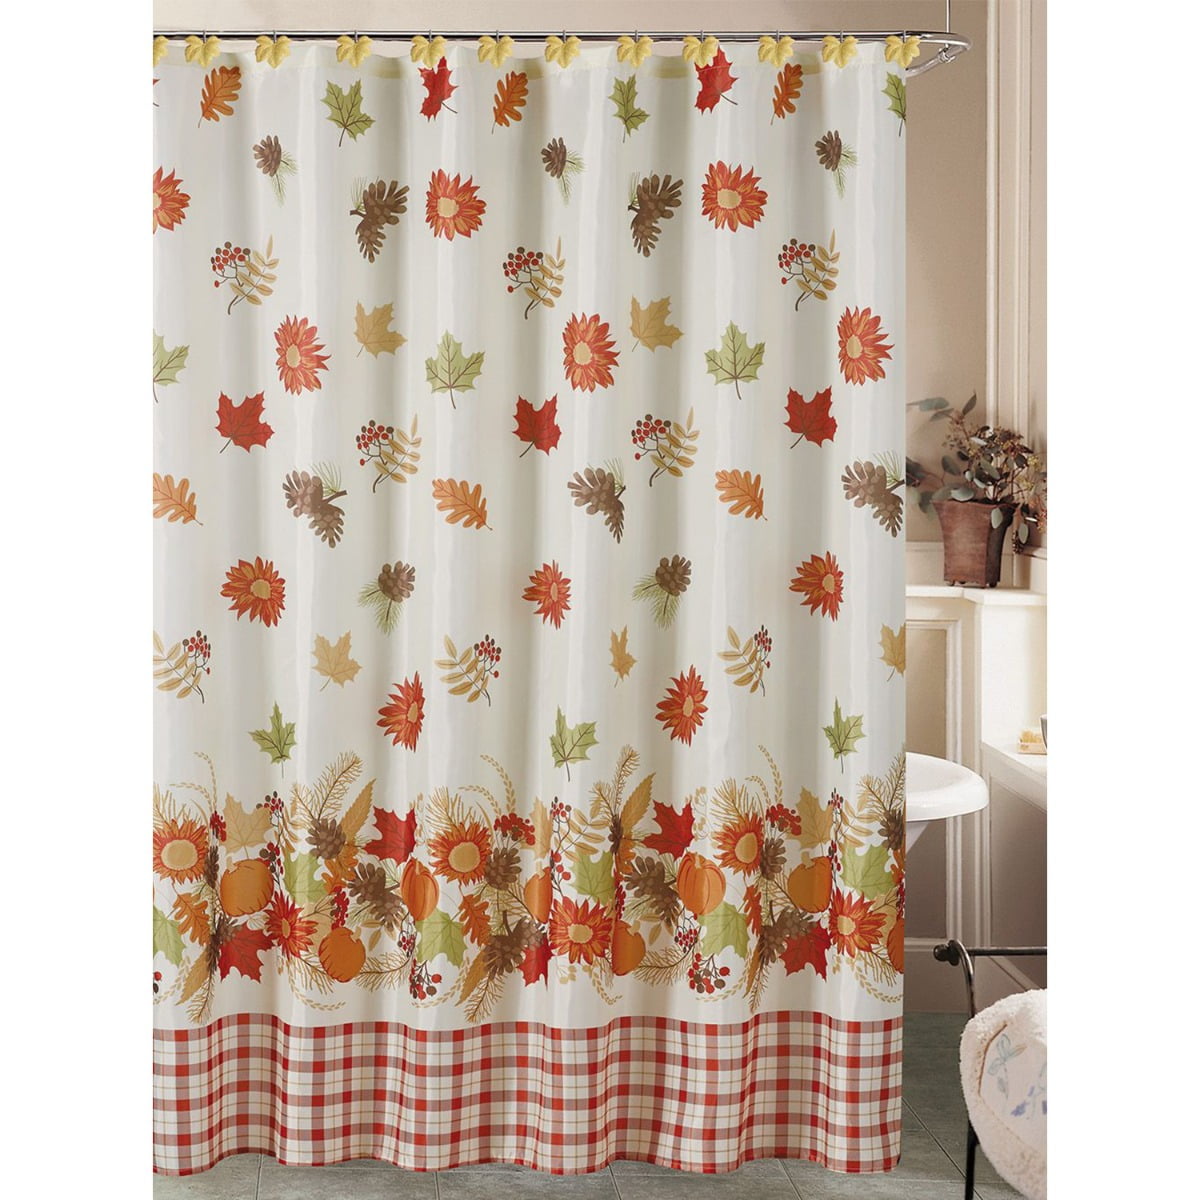 Details about   Fall Shower Curtain Retro Autumn View Print for Bathroom 